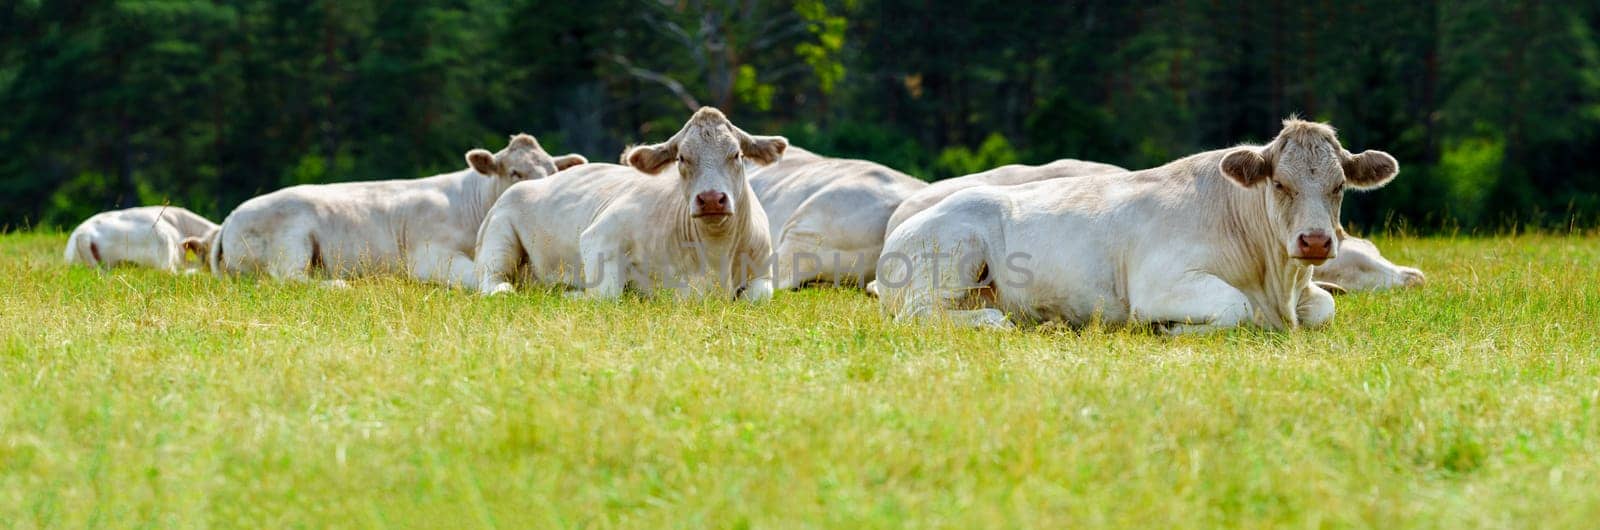 White French Cows Resting on Green Grass on a Sunny Summer Day by PhotoTime